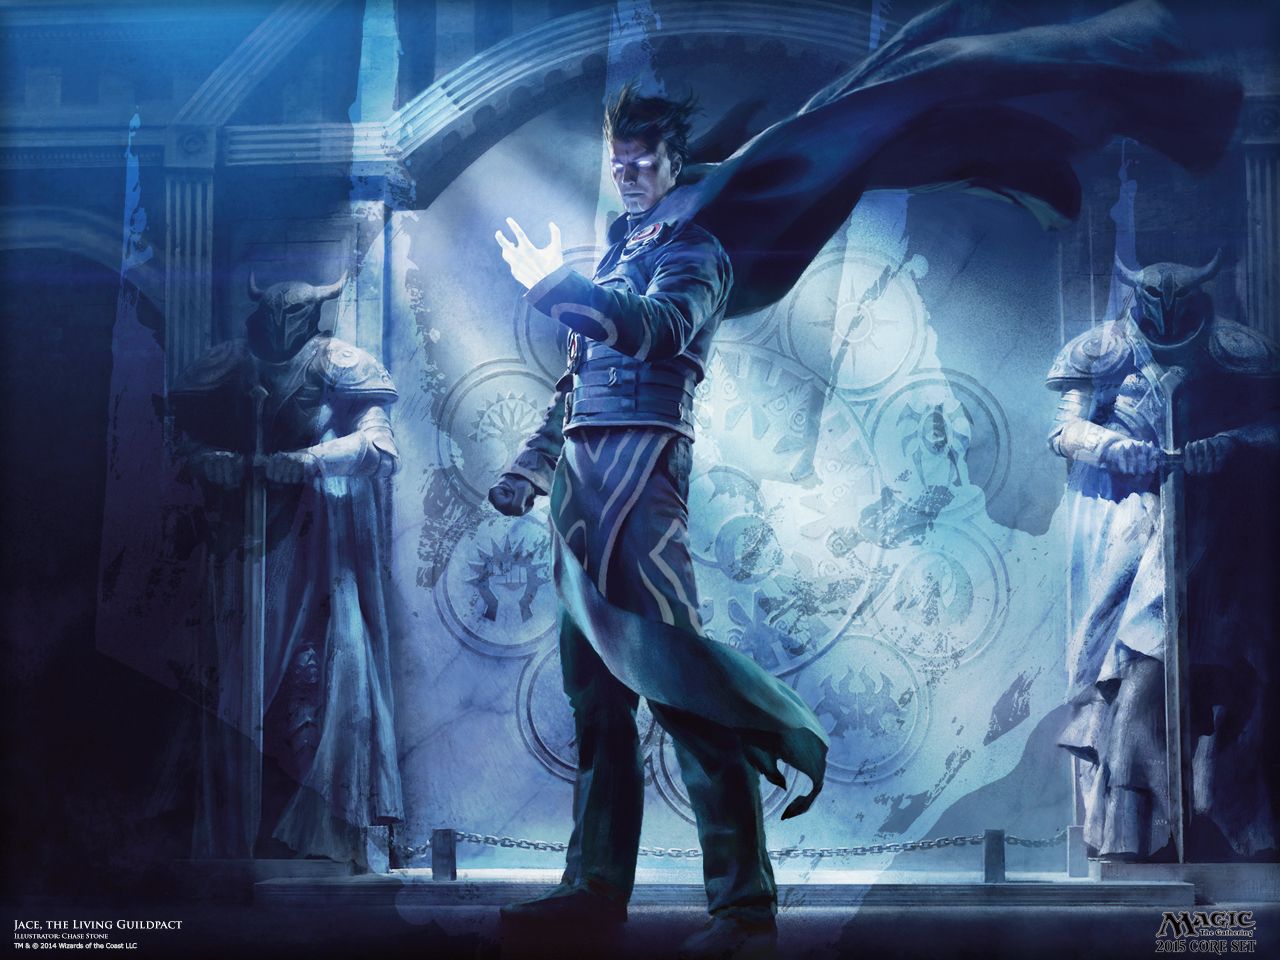 Magic The Gathering Jace Wallpapers